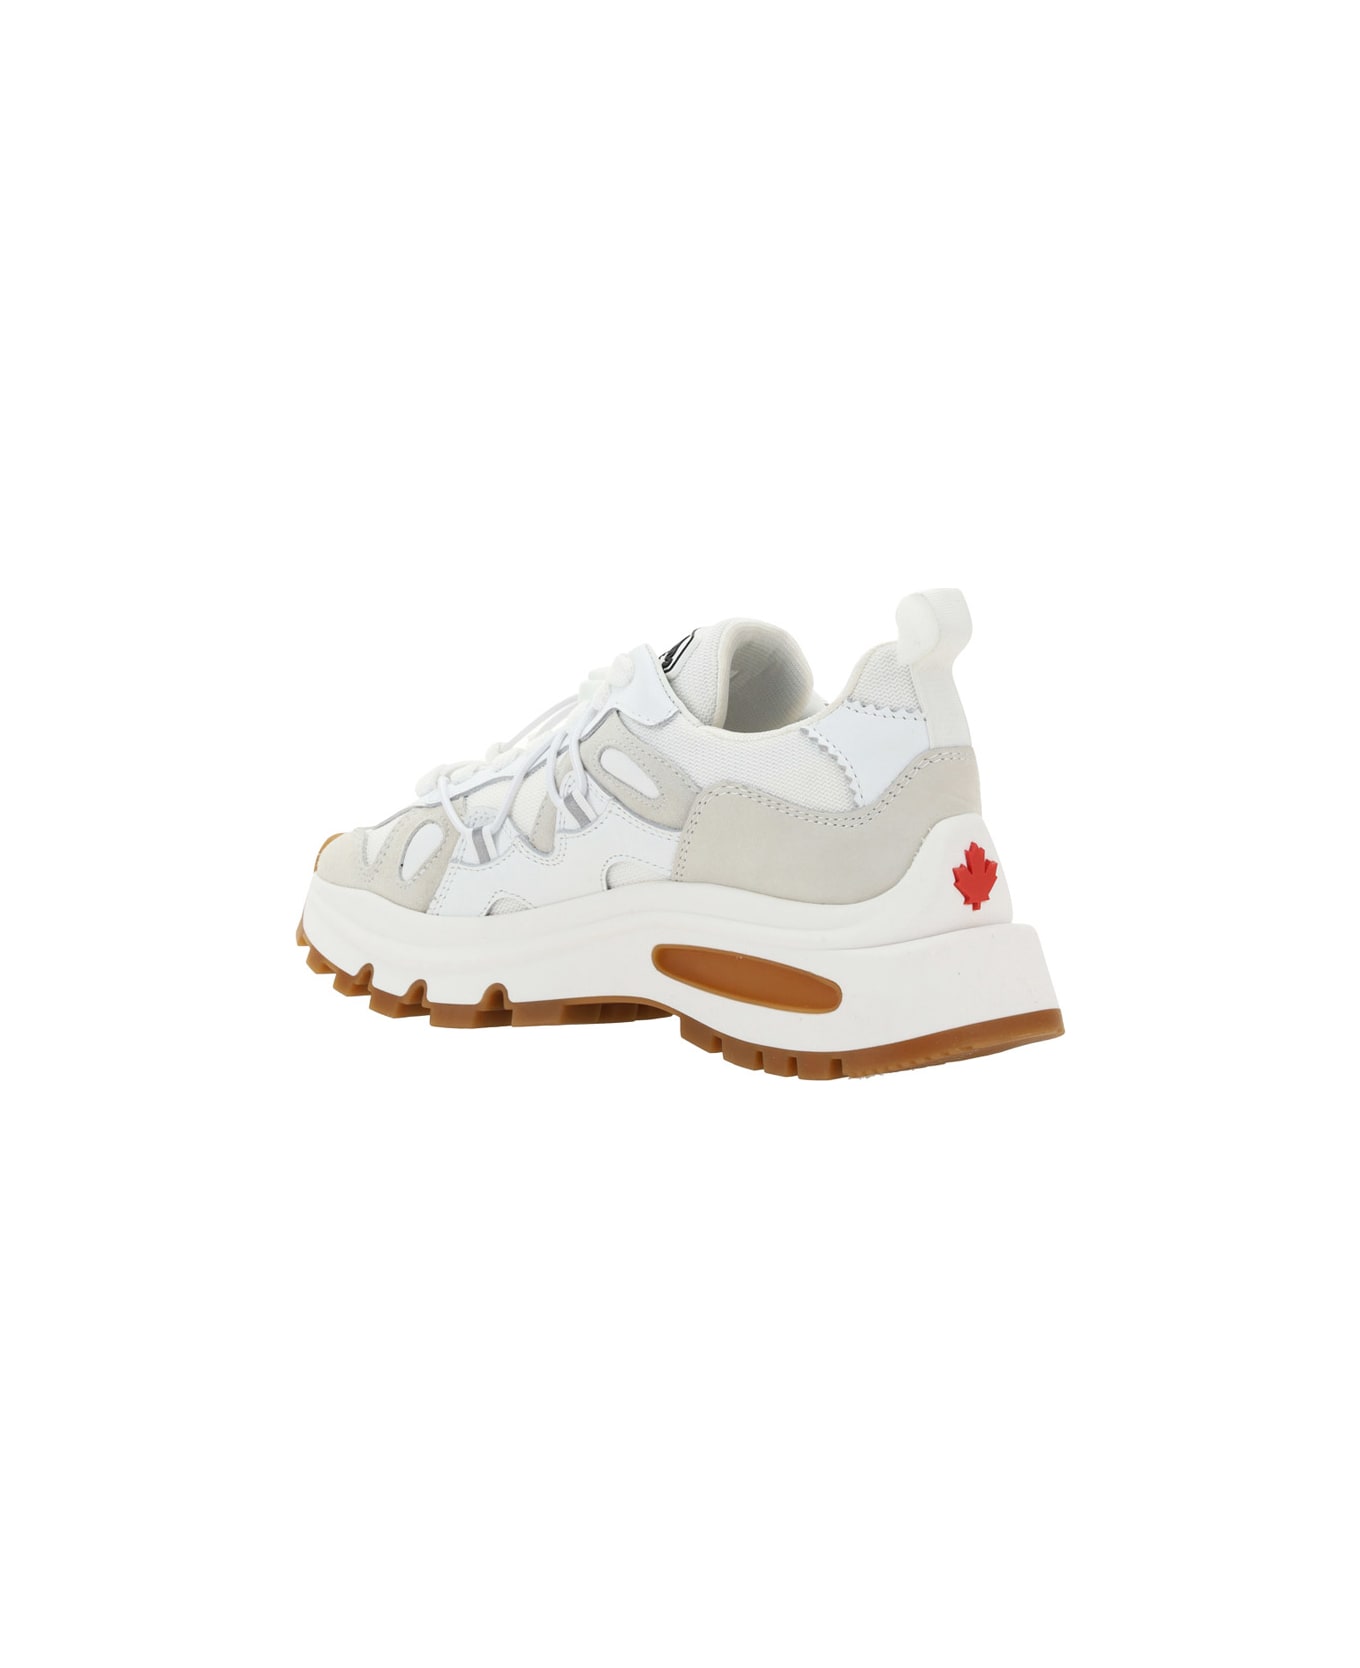 Dsquared2 Run Ds2 Sneakers - White スニーカー